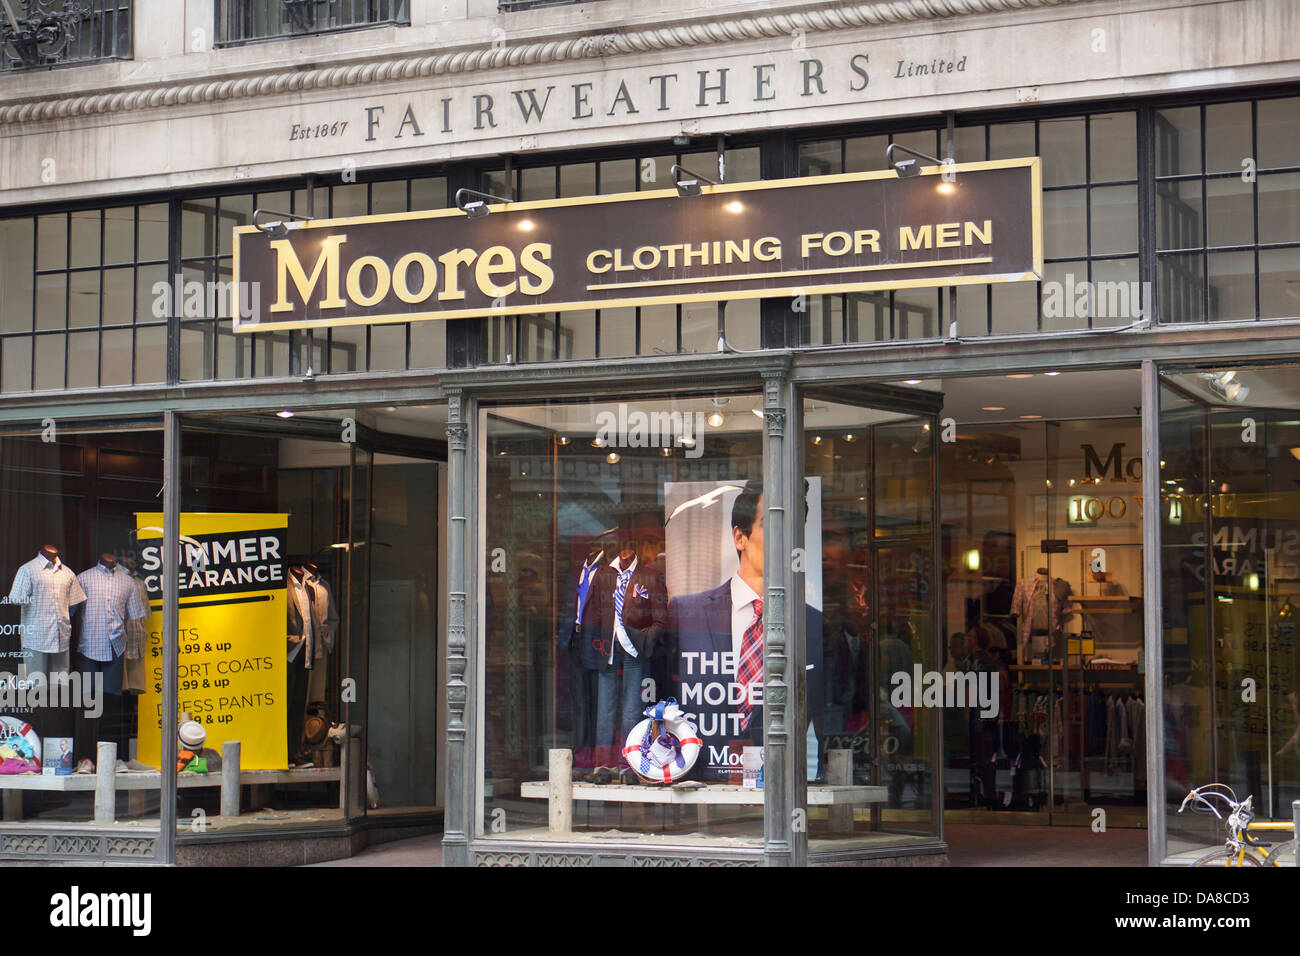 moores clothing for men